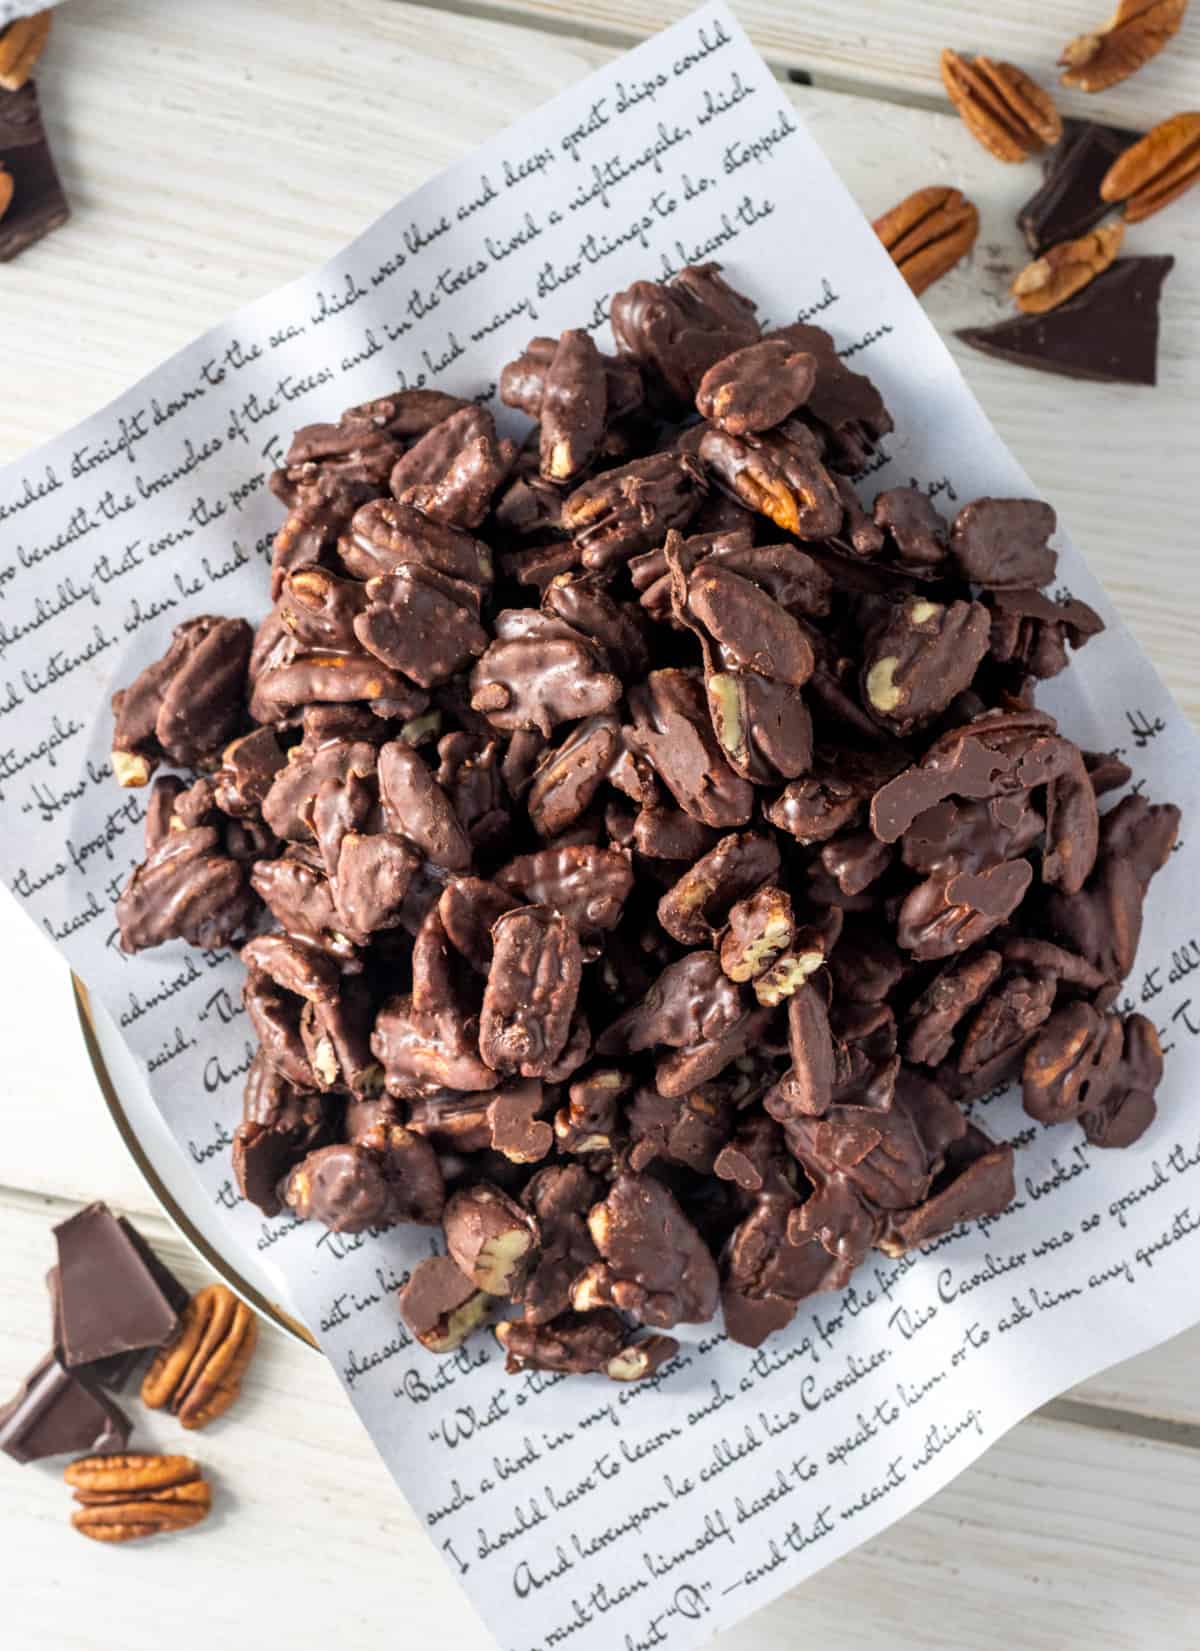 Chocolate covered pecans on a page from a book on a plate with chocolate and pecans all around.